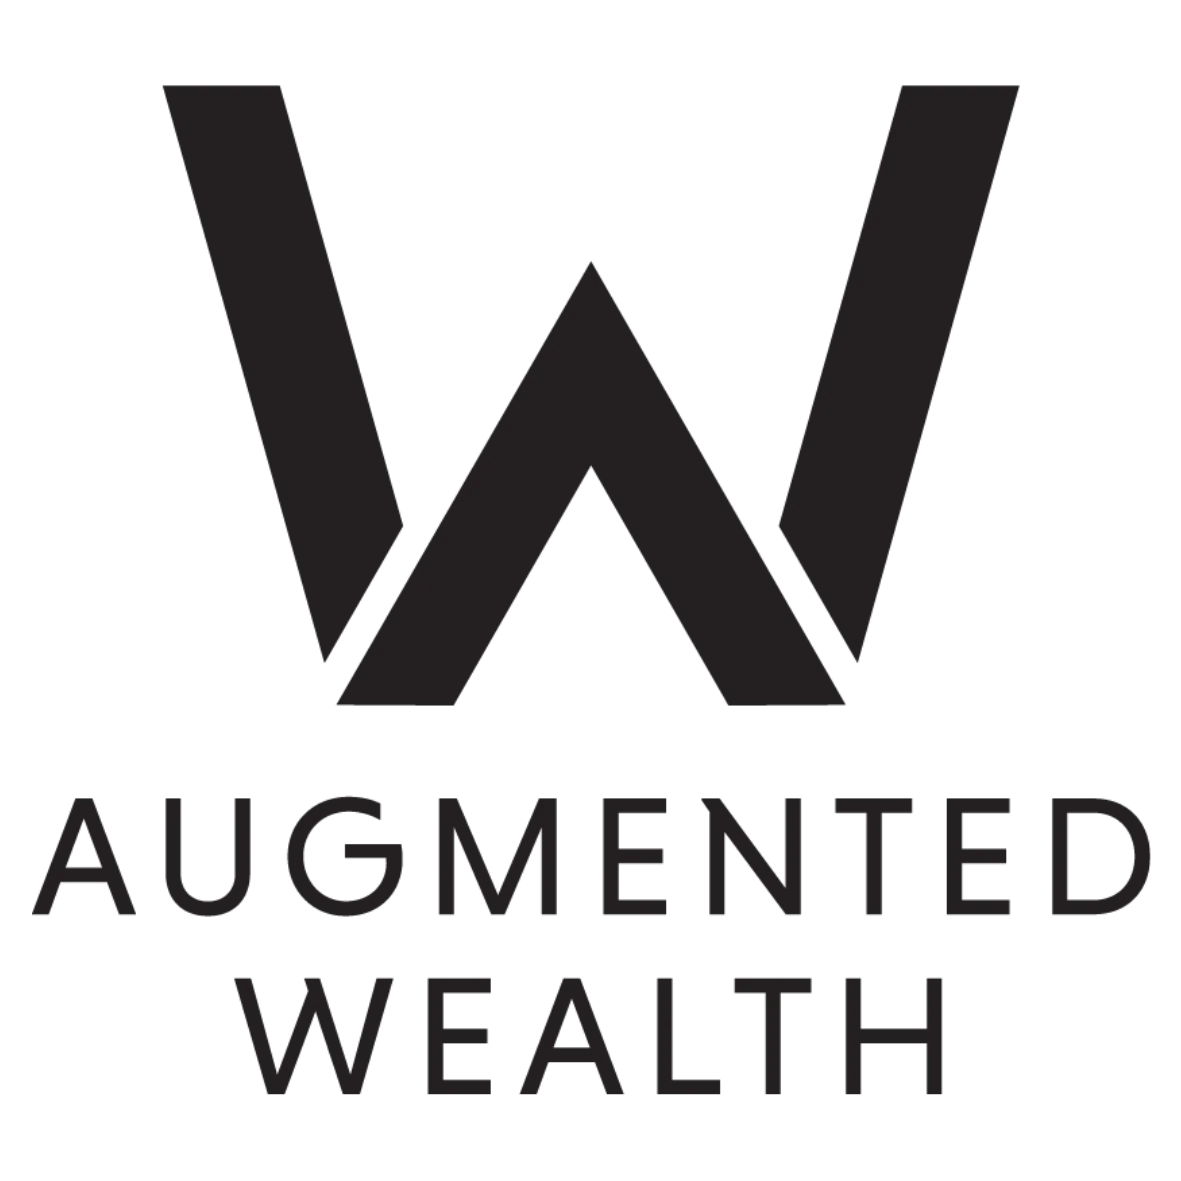 Augmented Wealth